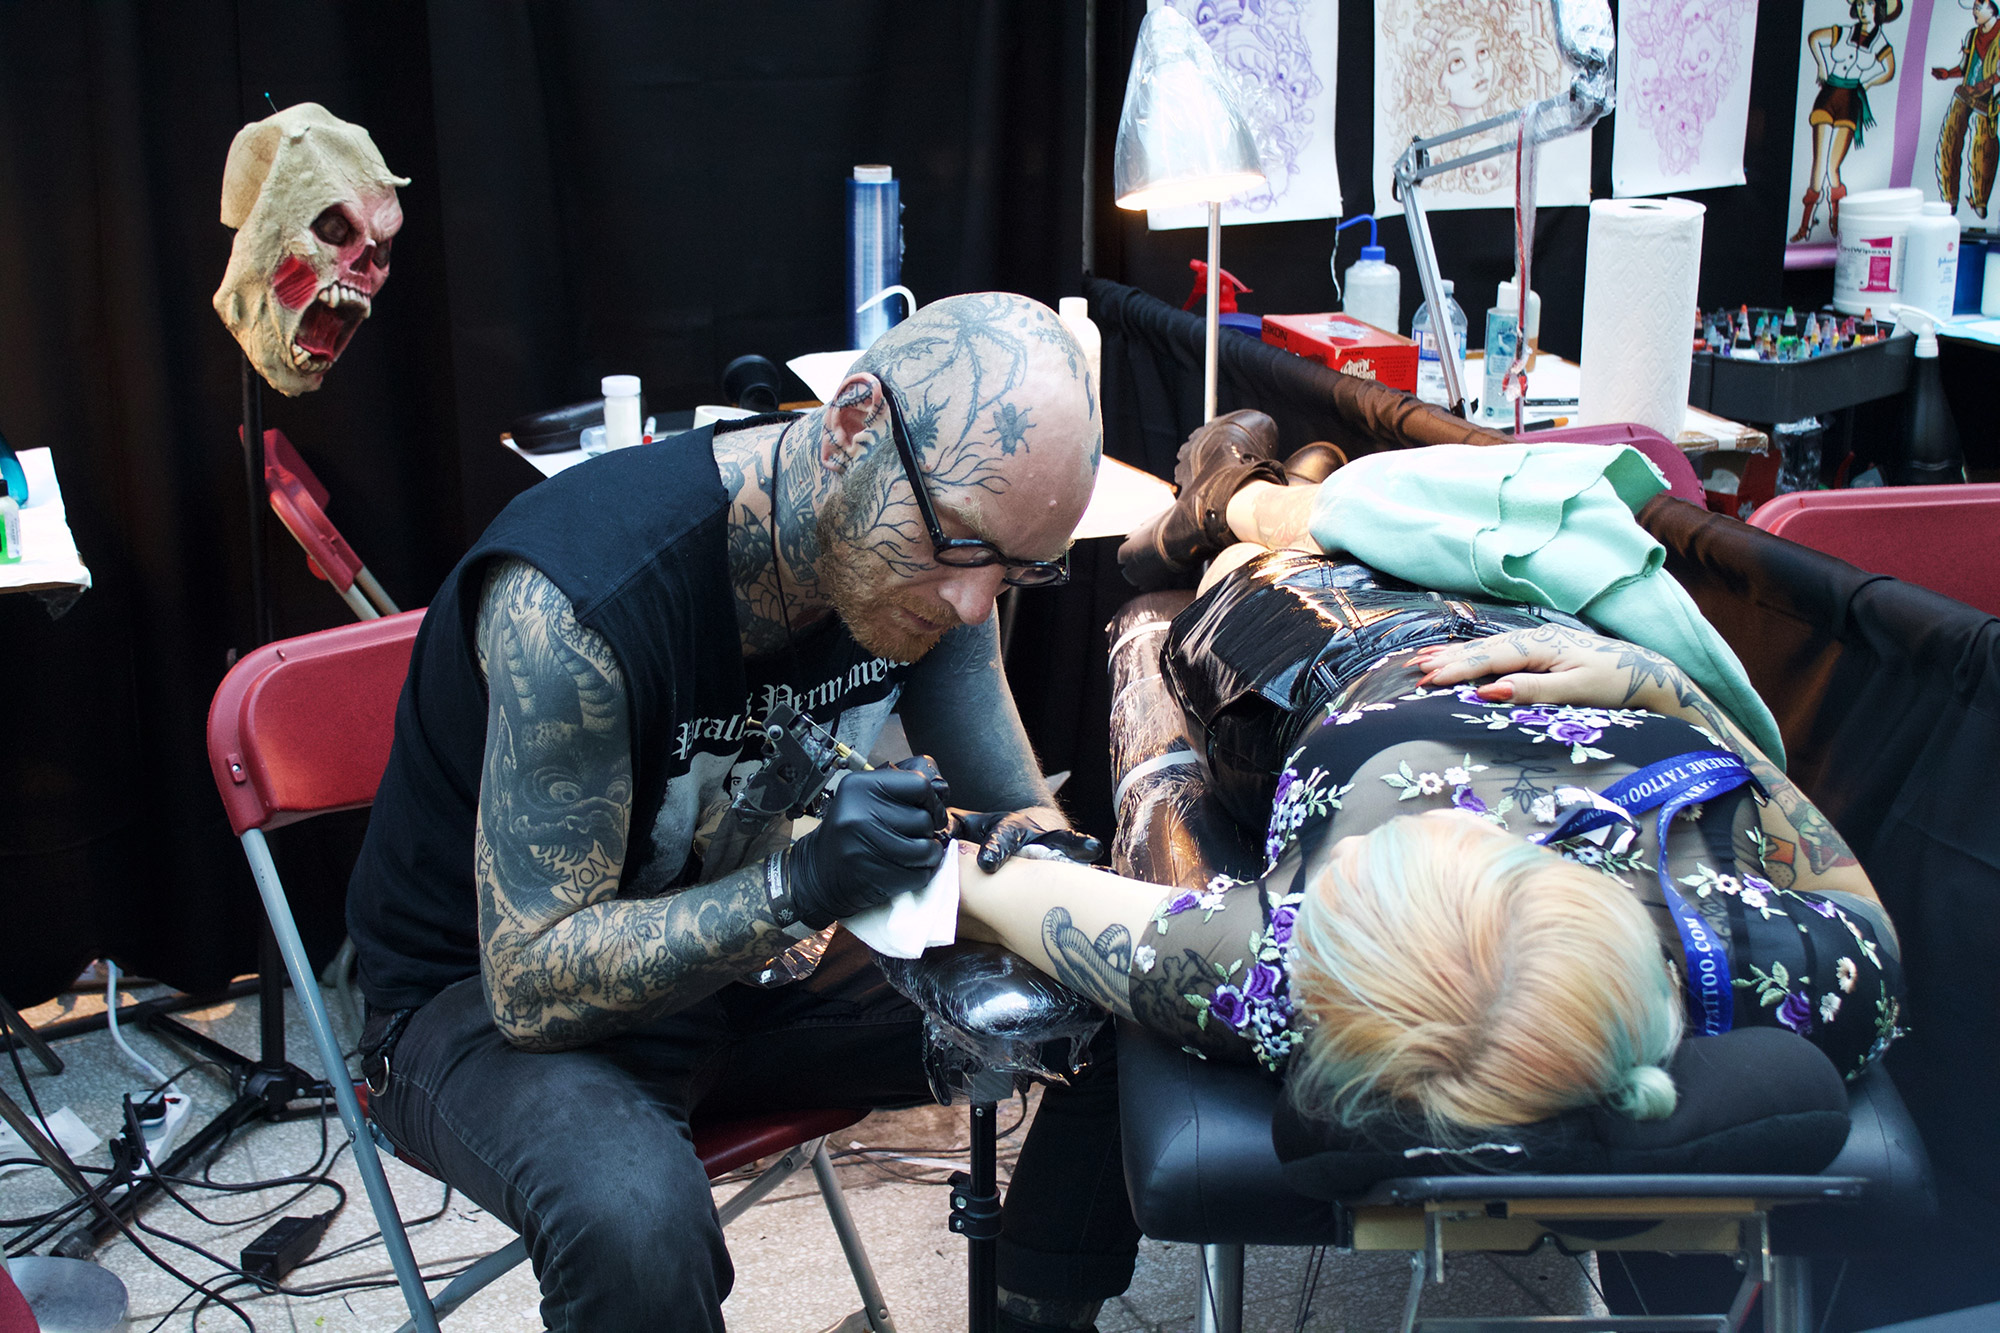 Art Tattoo Montreal Show - Rafel Delalande tattooing, cover